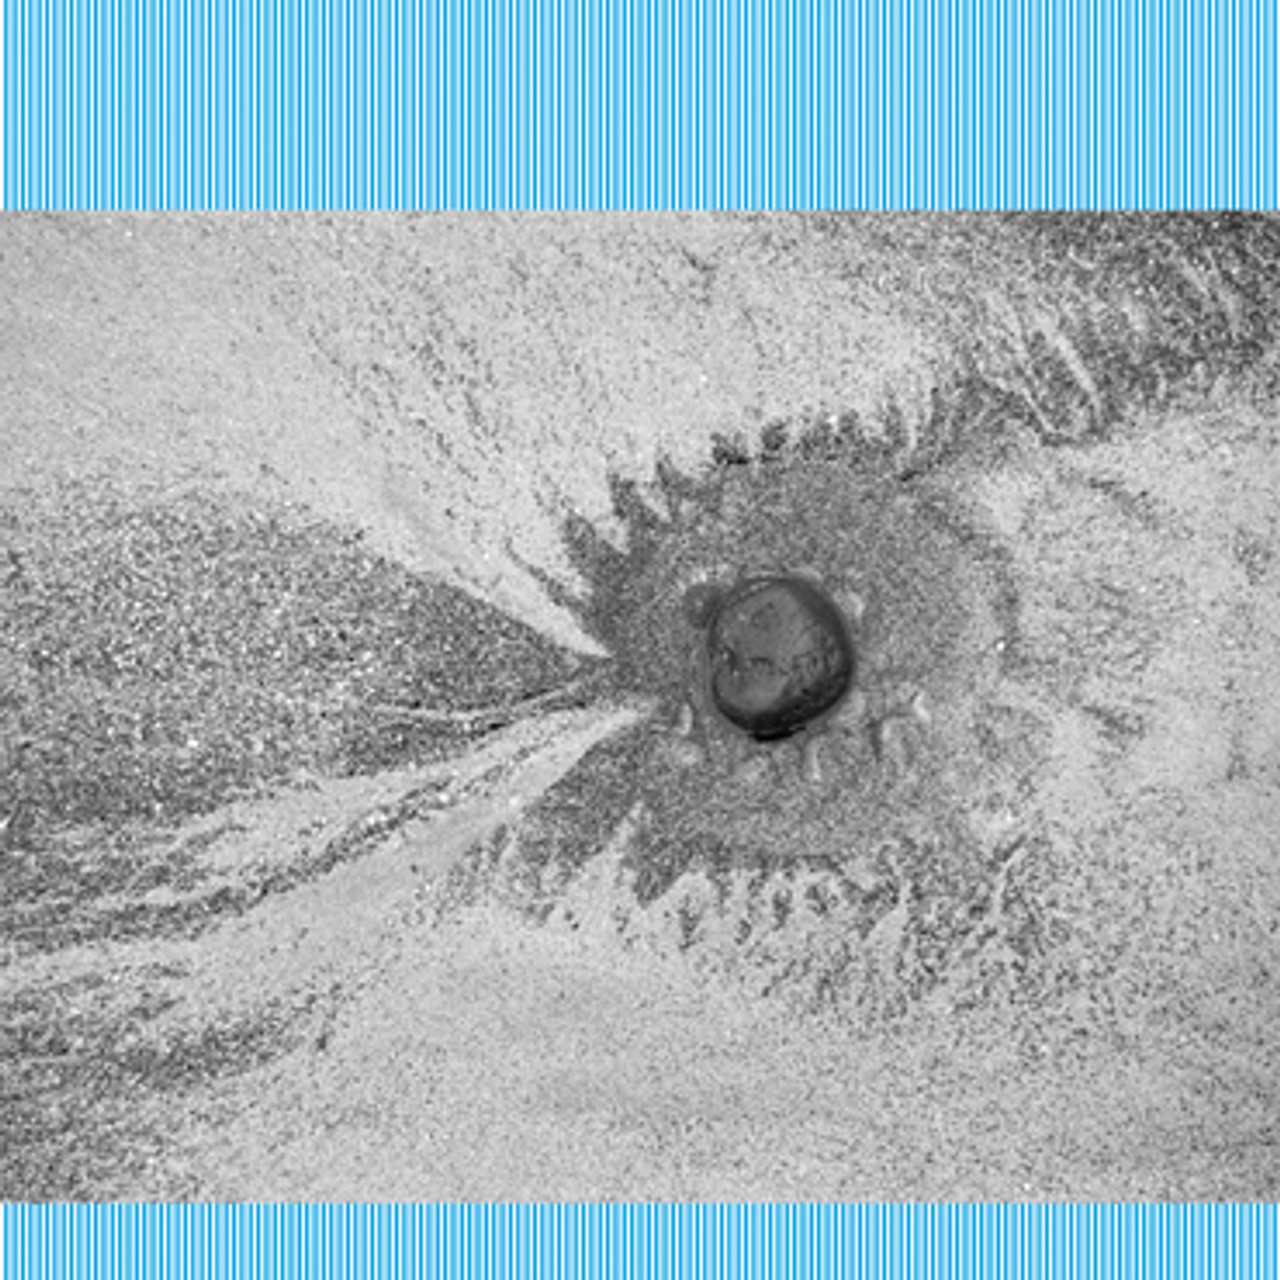 New Energy by Four Tet